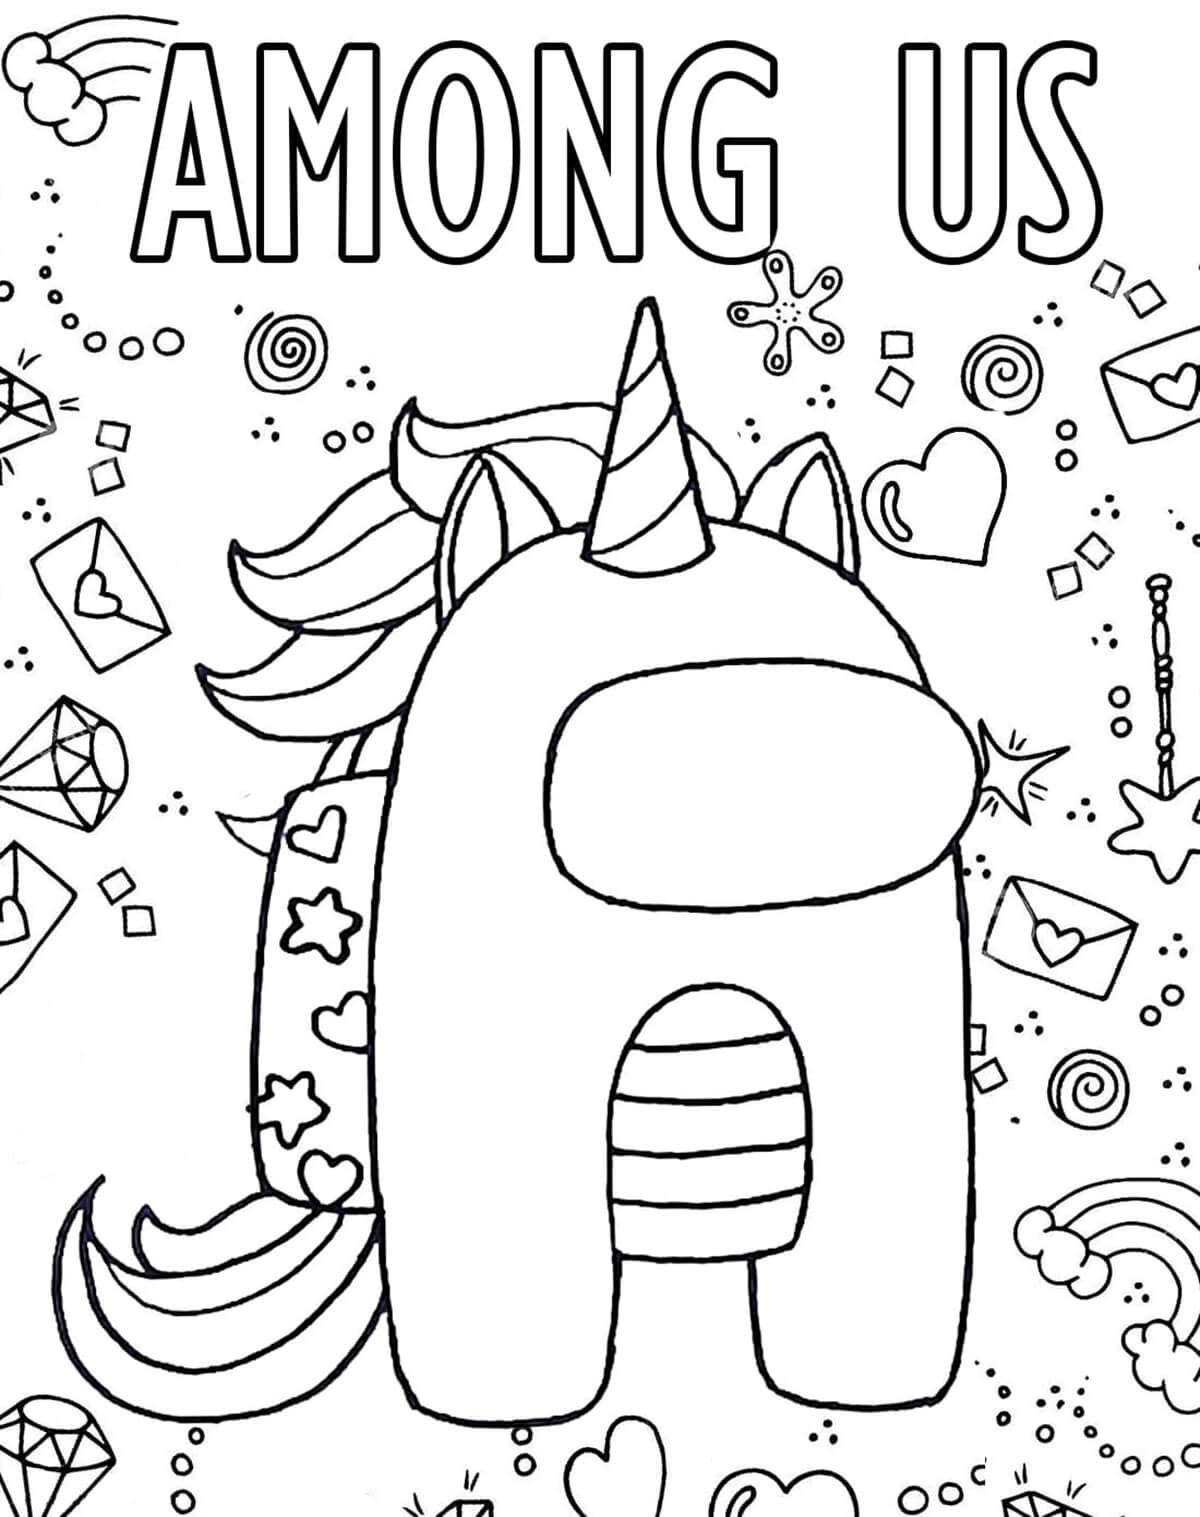 Among us ver. unicorn Coloring Pages